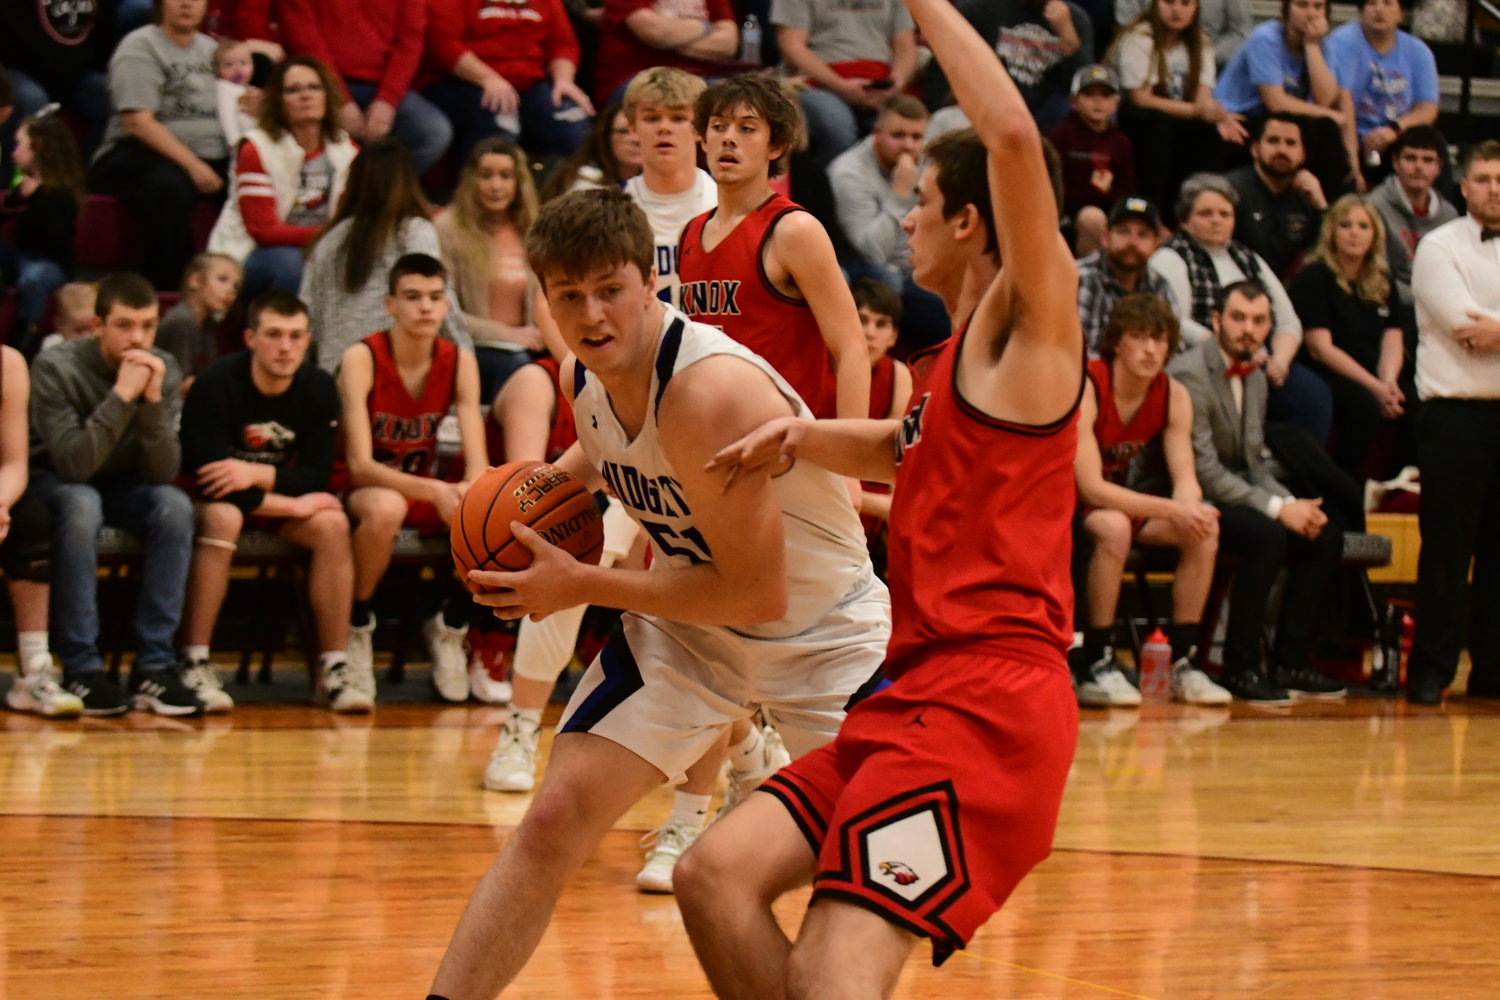 Photos from Saturday’s Class 2 District 6 boys title game between Putnam County and Knox County.